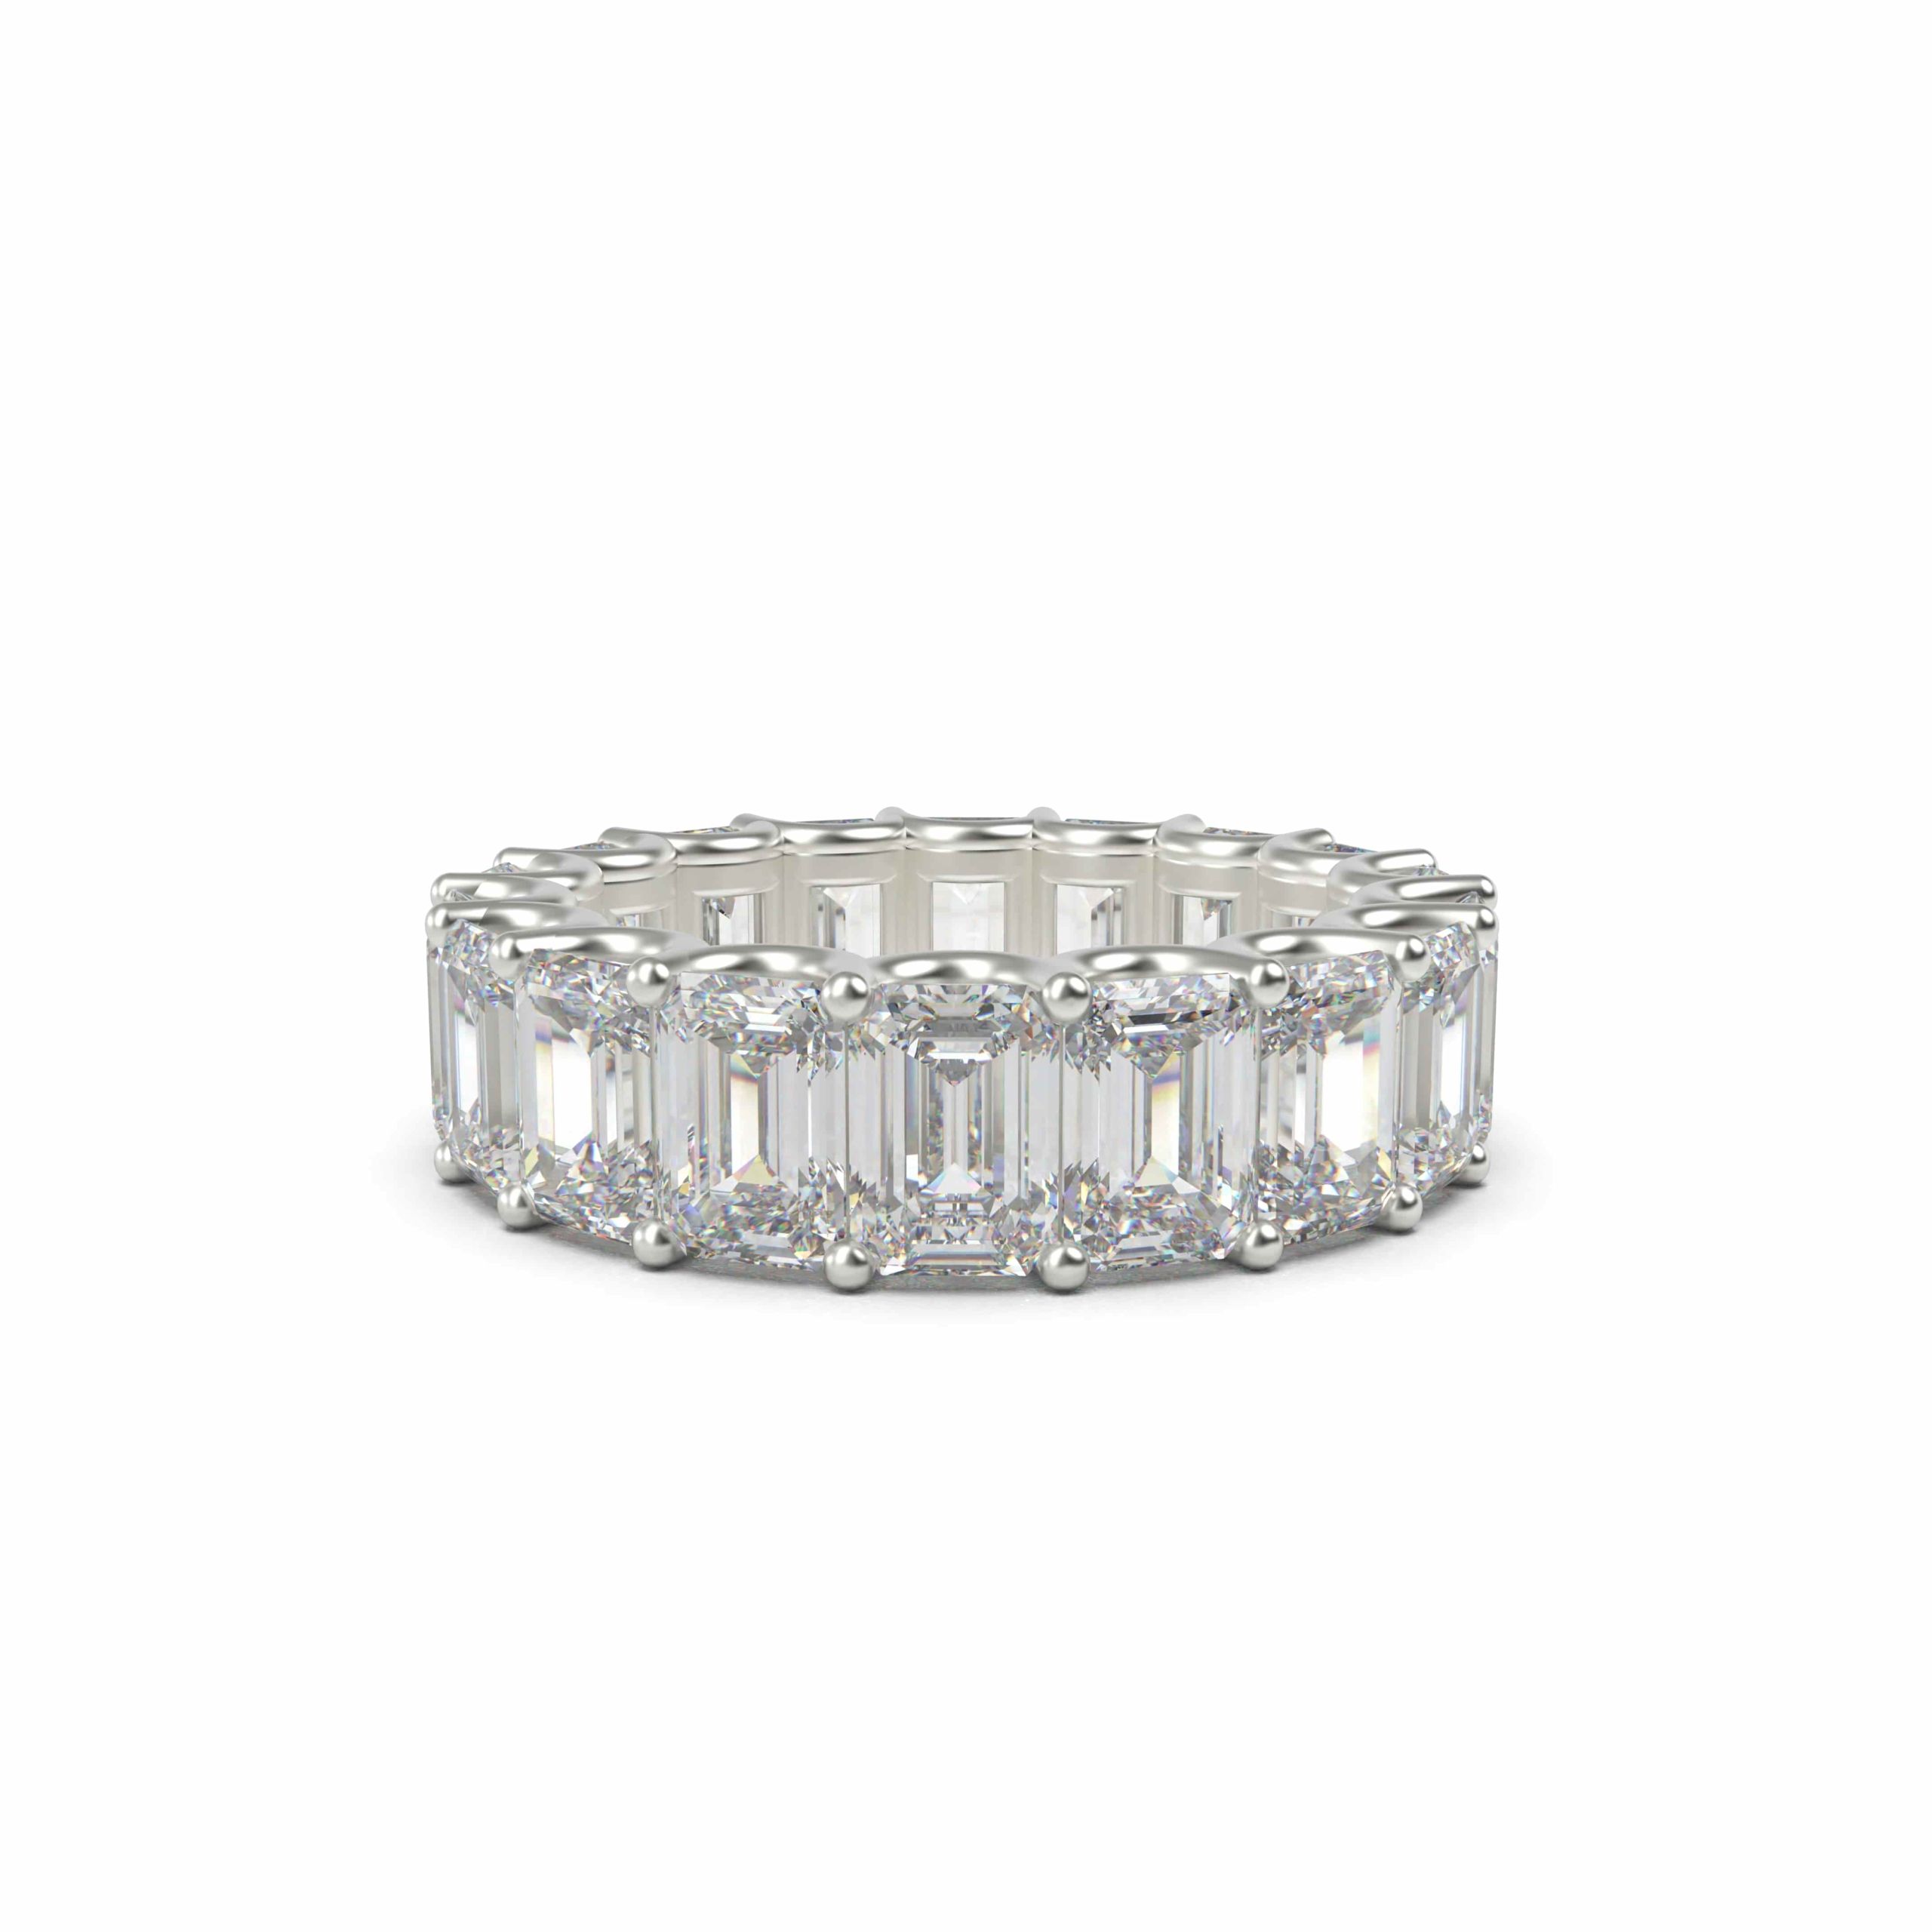 French U Emerald Eternity Ring by Cultive - White Gold